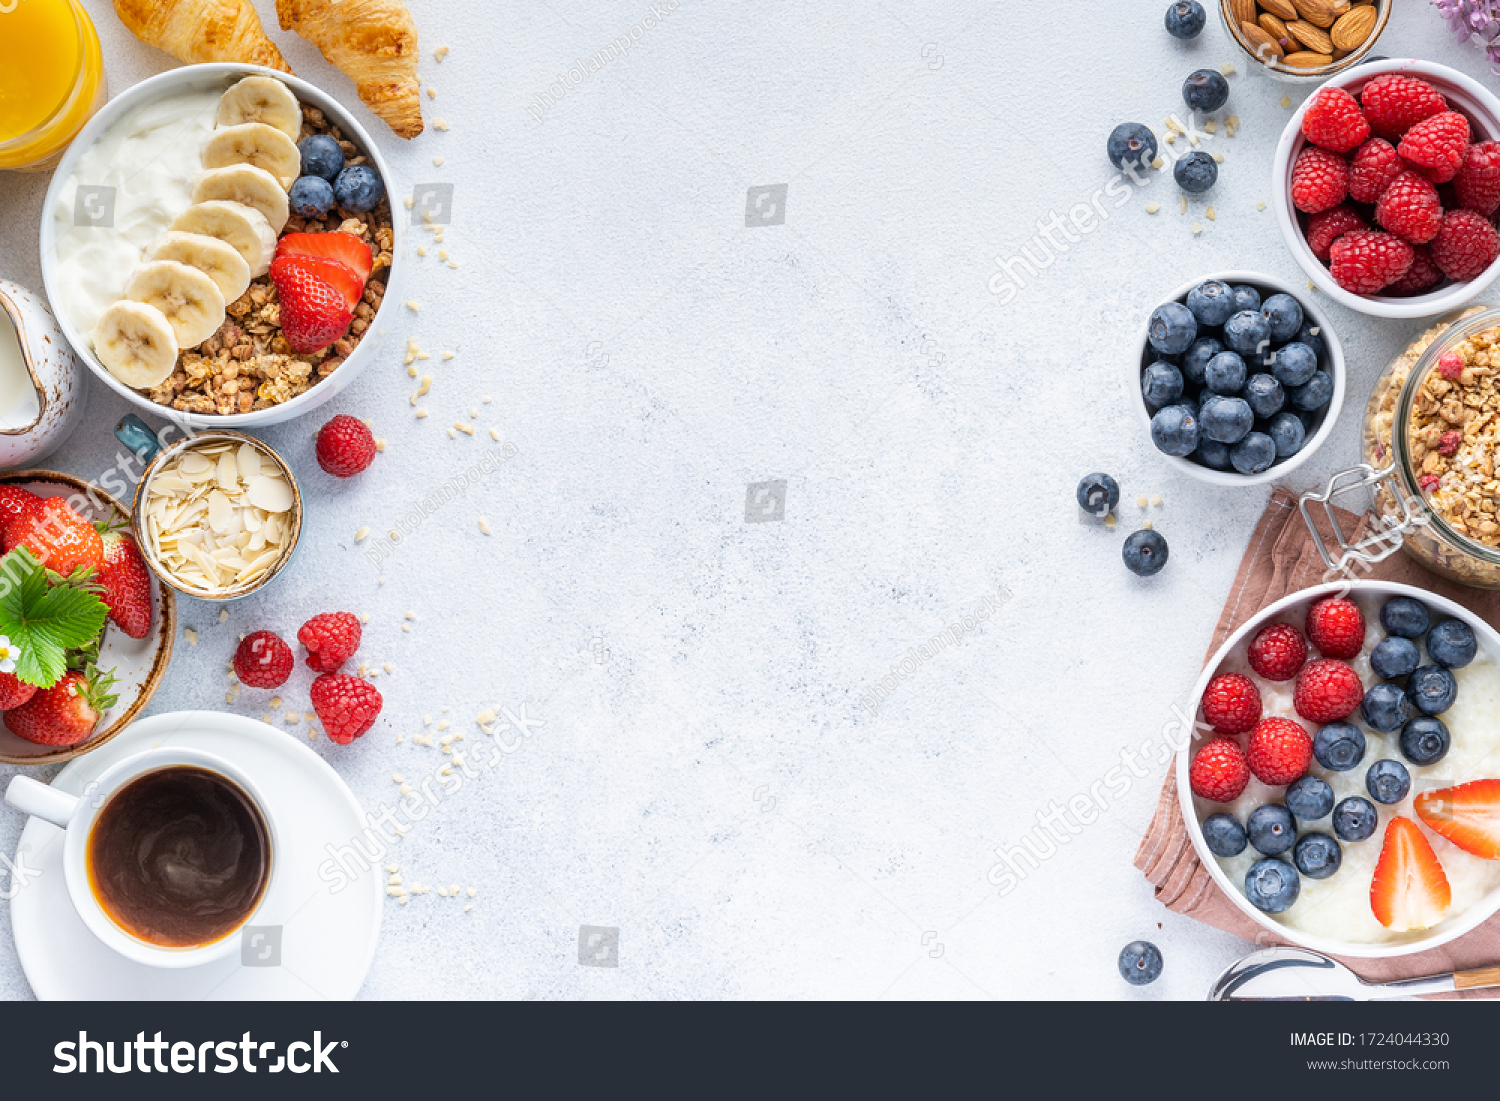 Healthy breakfast set on grey background. The concept of delicious and healthy food. Top view, copy space. #1724044330